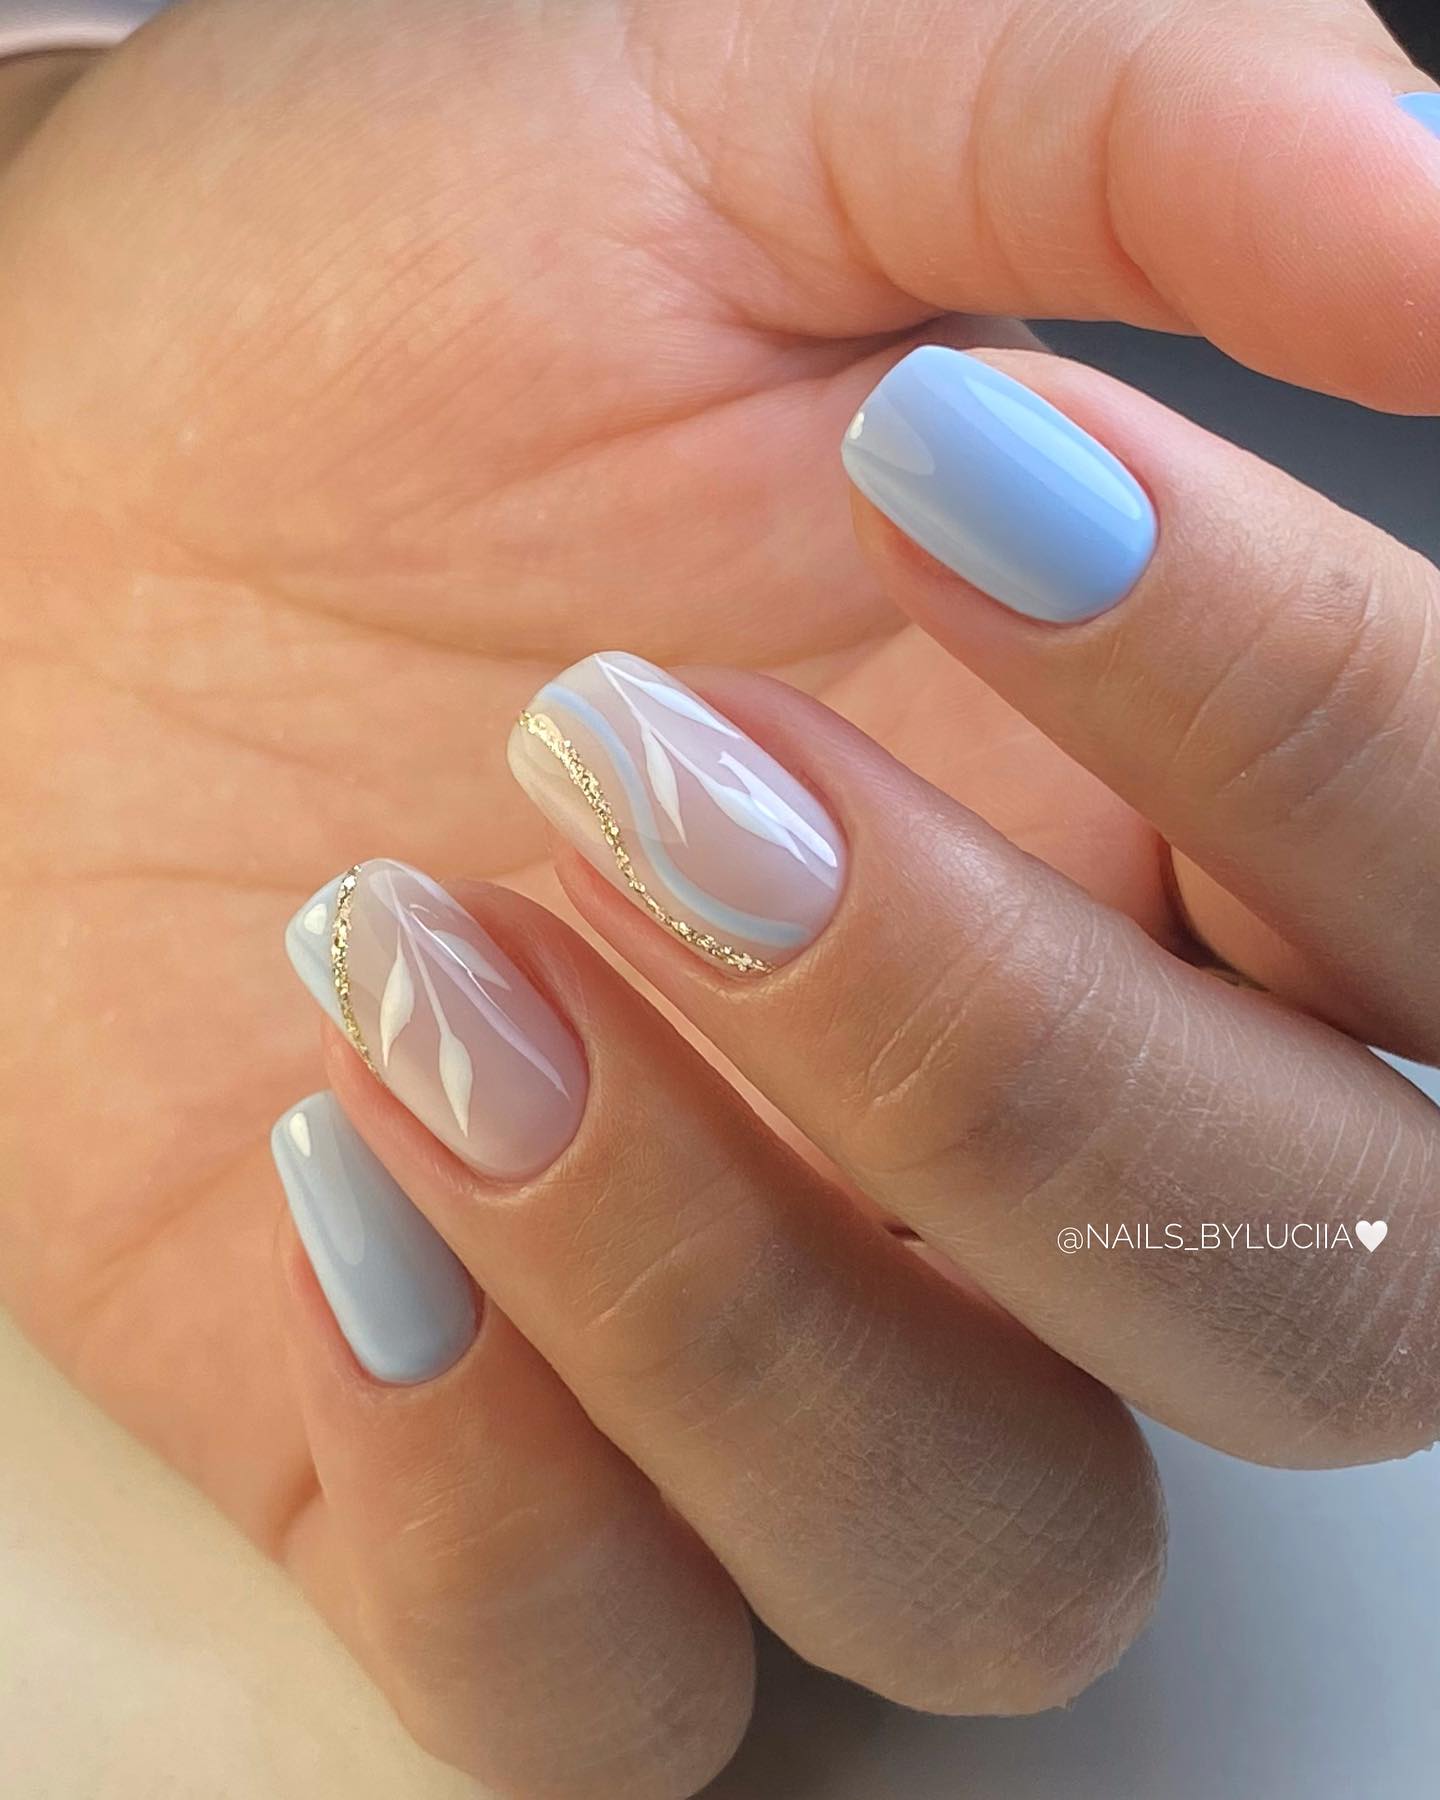 100+ Short Nail Designs You’ll Want To Try This Year images 70